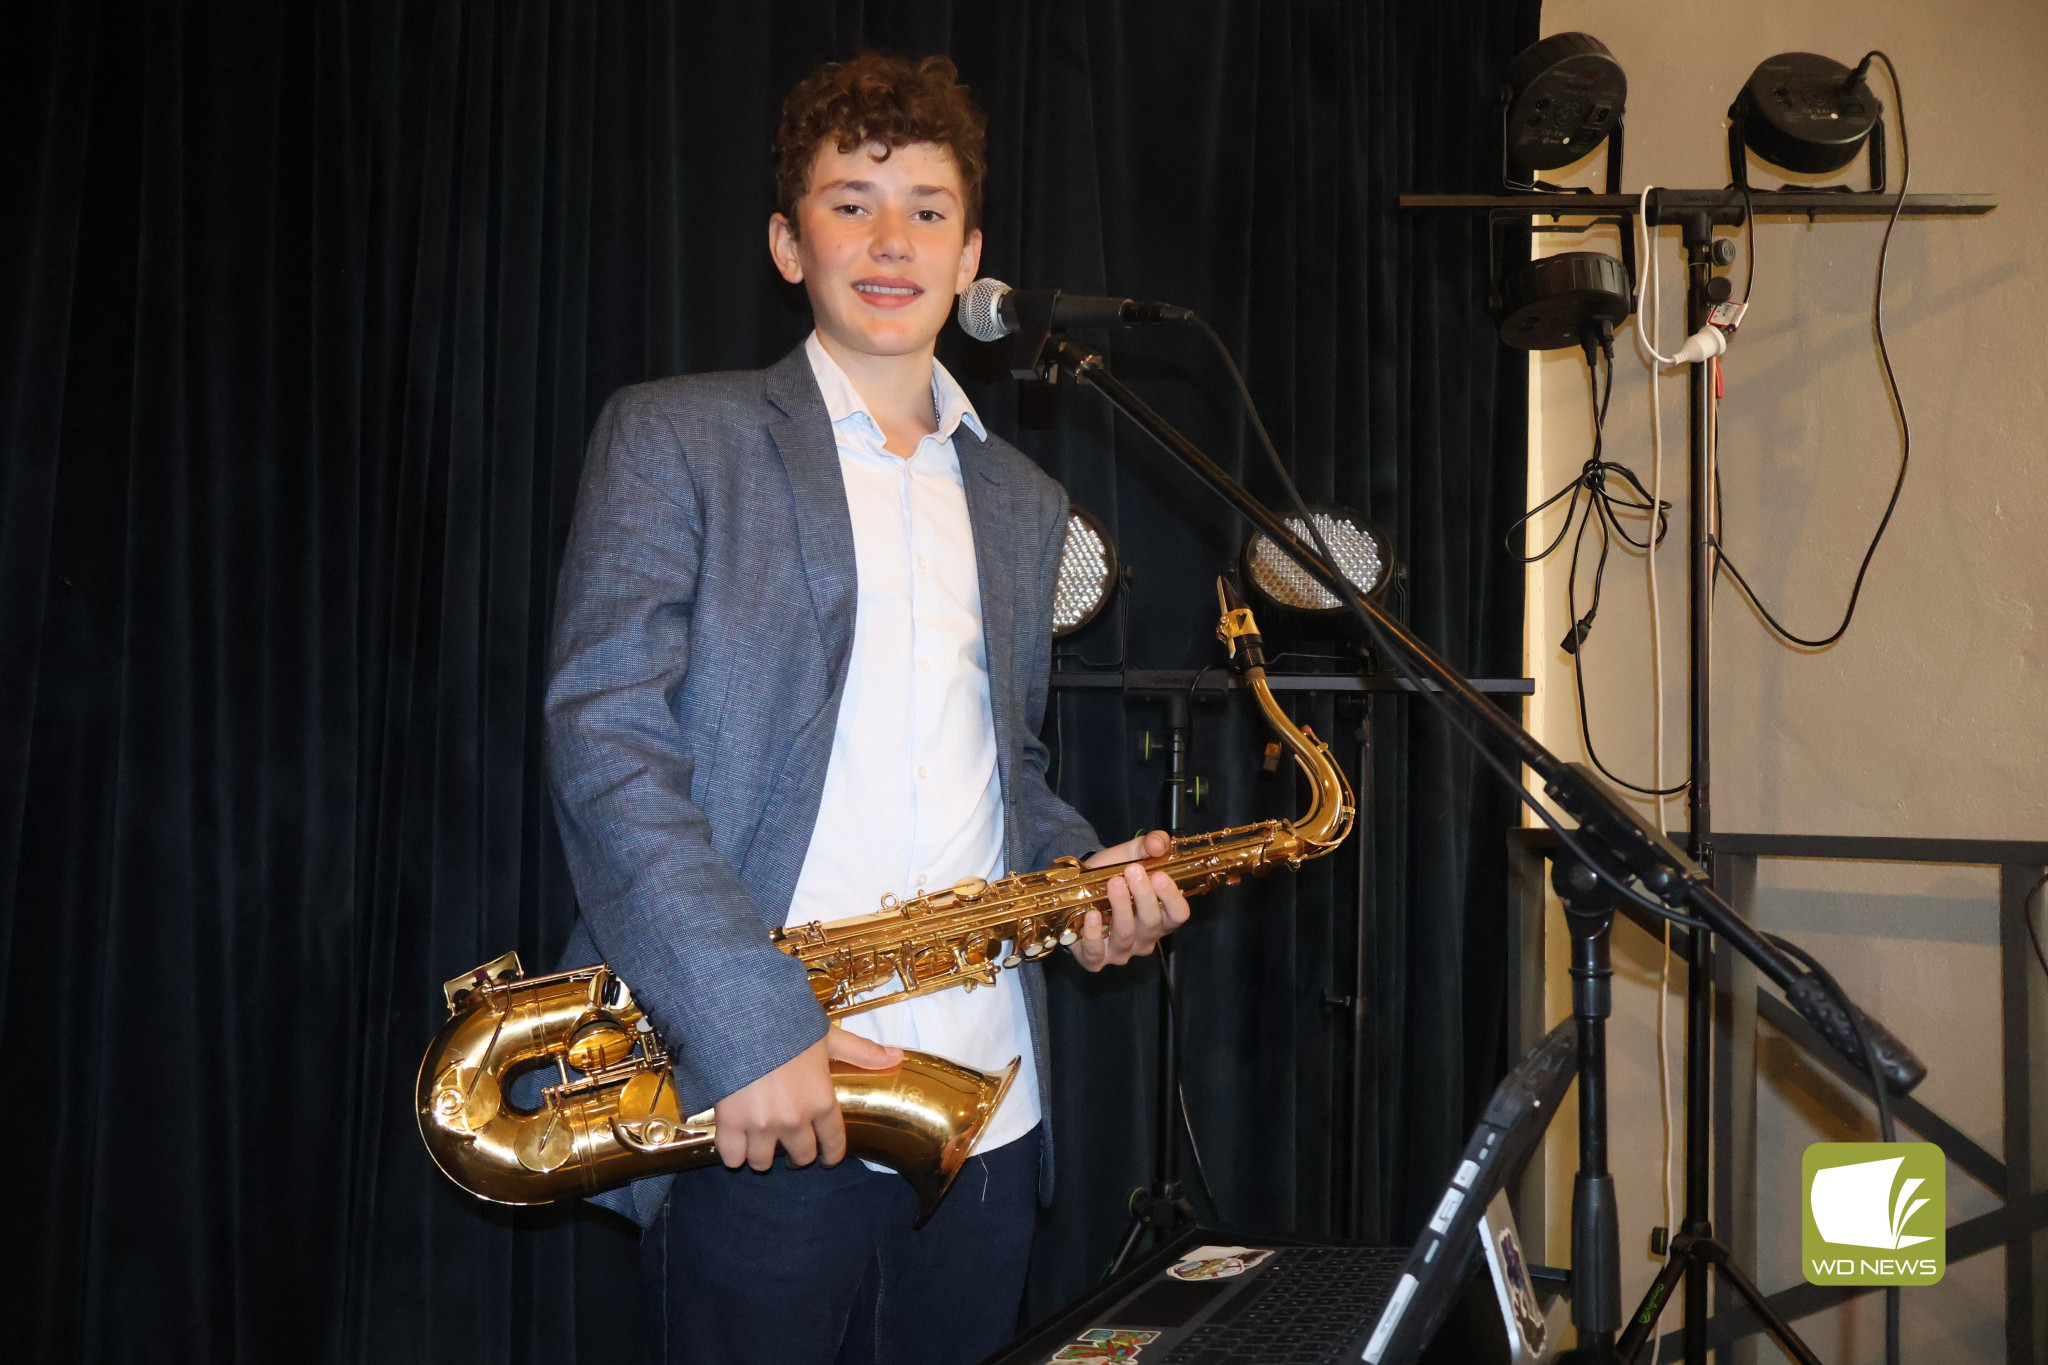 Coming home: Teenage sensation James Eller returned to Terang over the weekend to perform in front of a packed house at the Commercial Hotel. The young musician always books a gig in Terang when he’s visiting for the Port Fairy Jazz Festival so his grandparents get to see him perform.